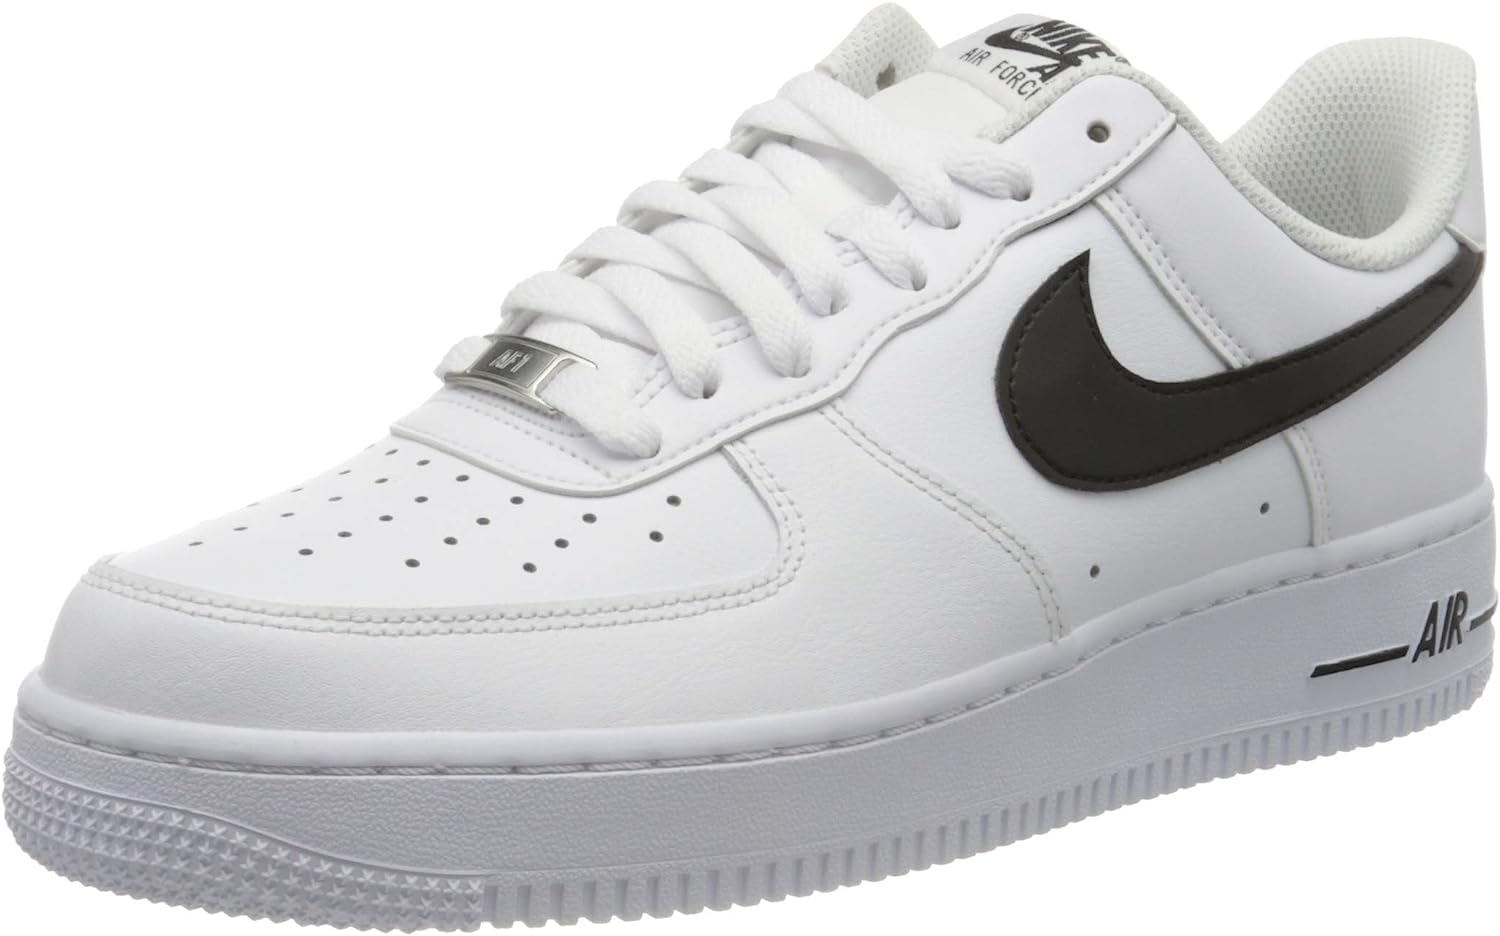 Nike Men's AIR Force 1 '07 Casual Shoes (13, White/Black)